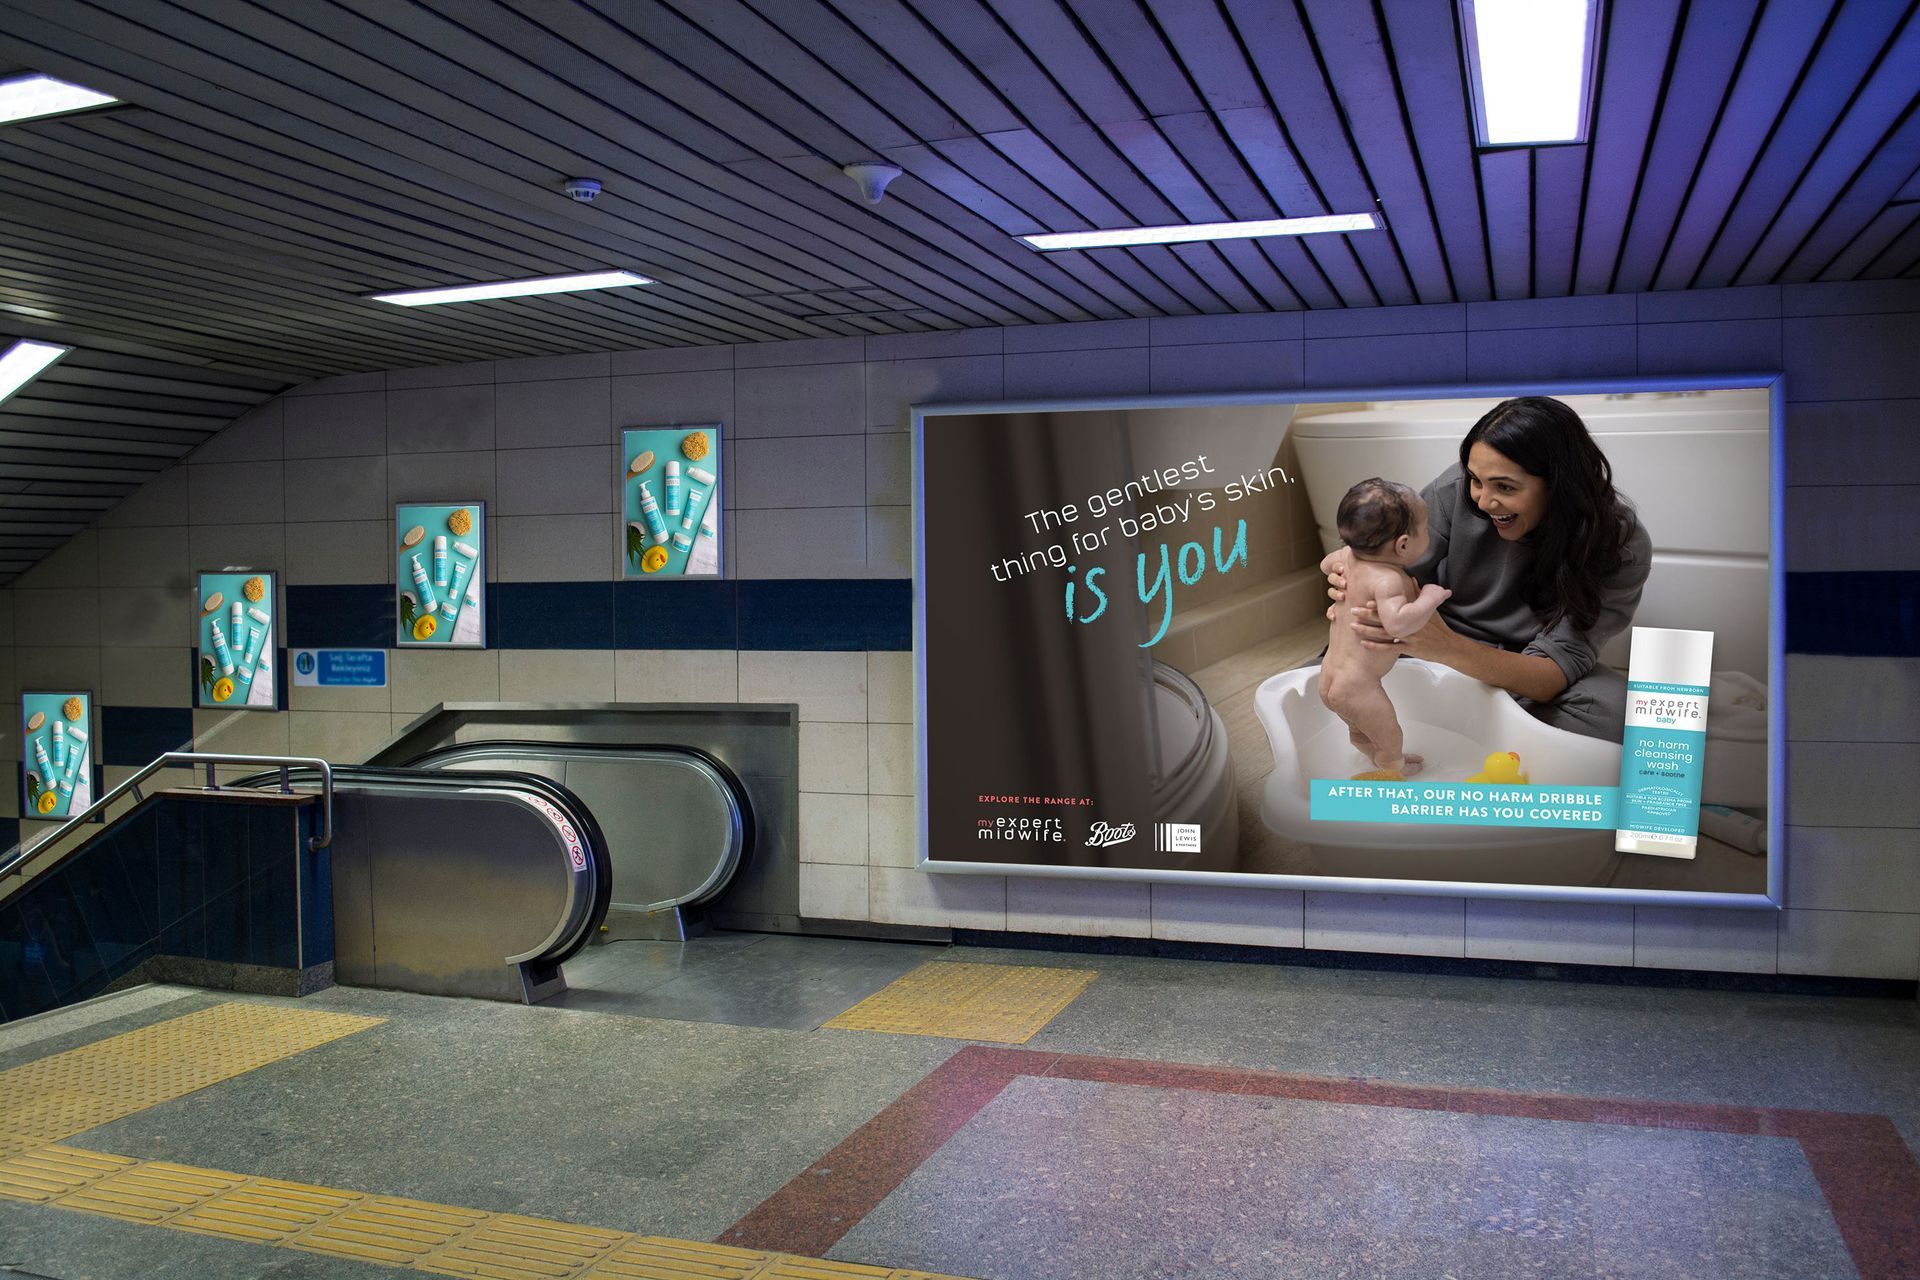 a billboard in a subway station shows a woman holding a baby